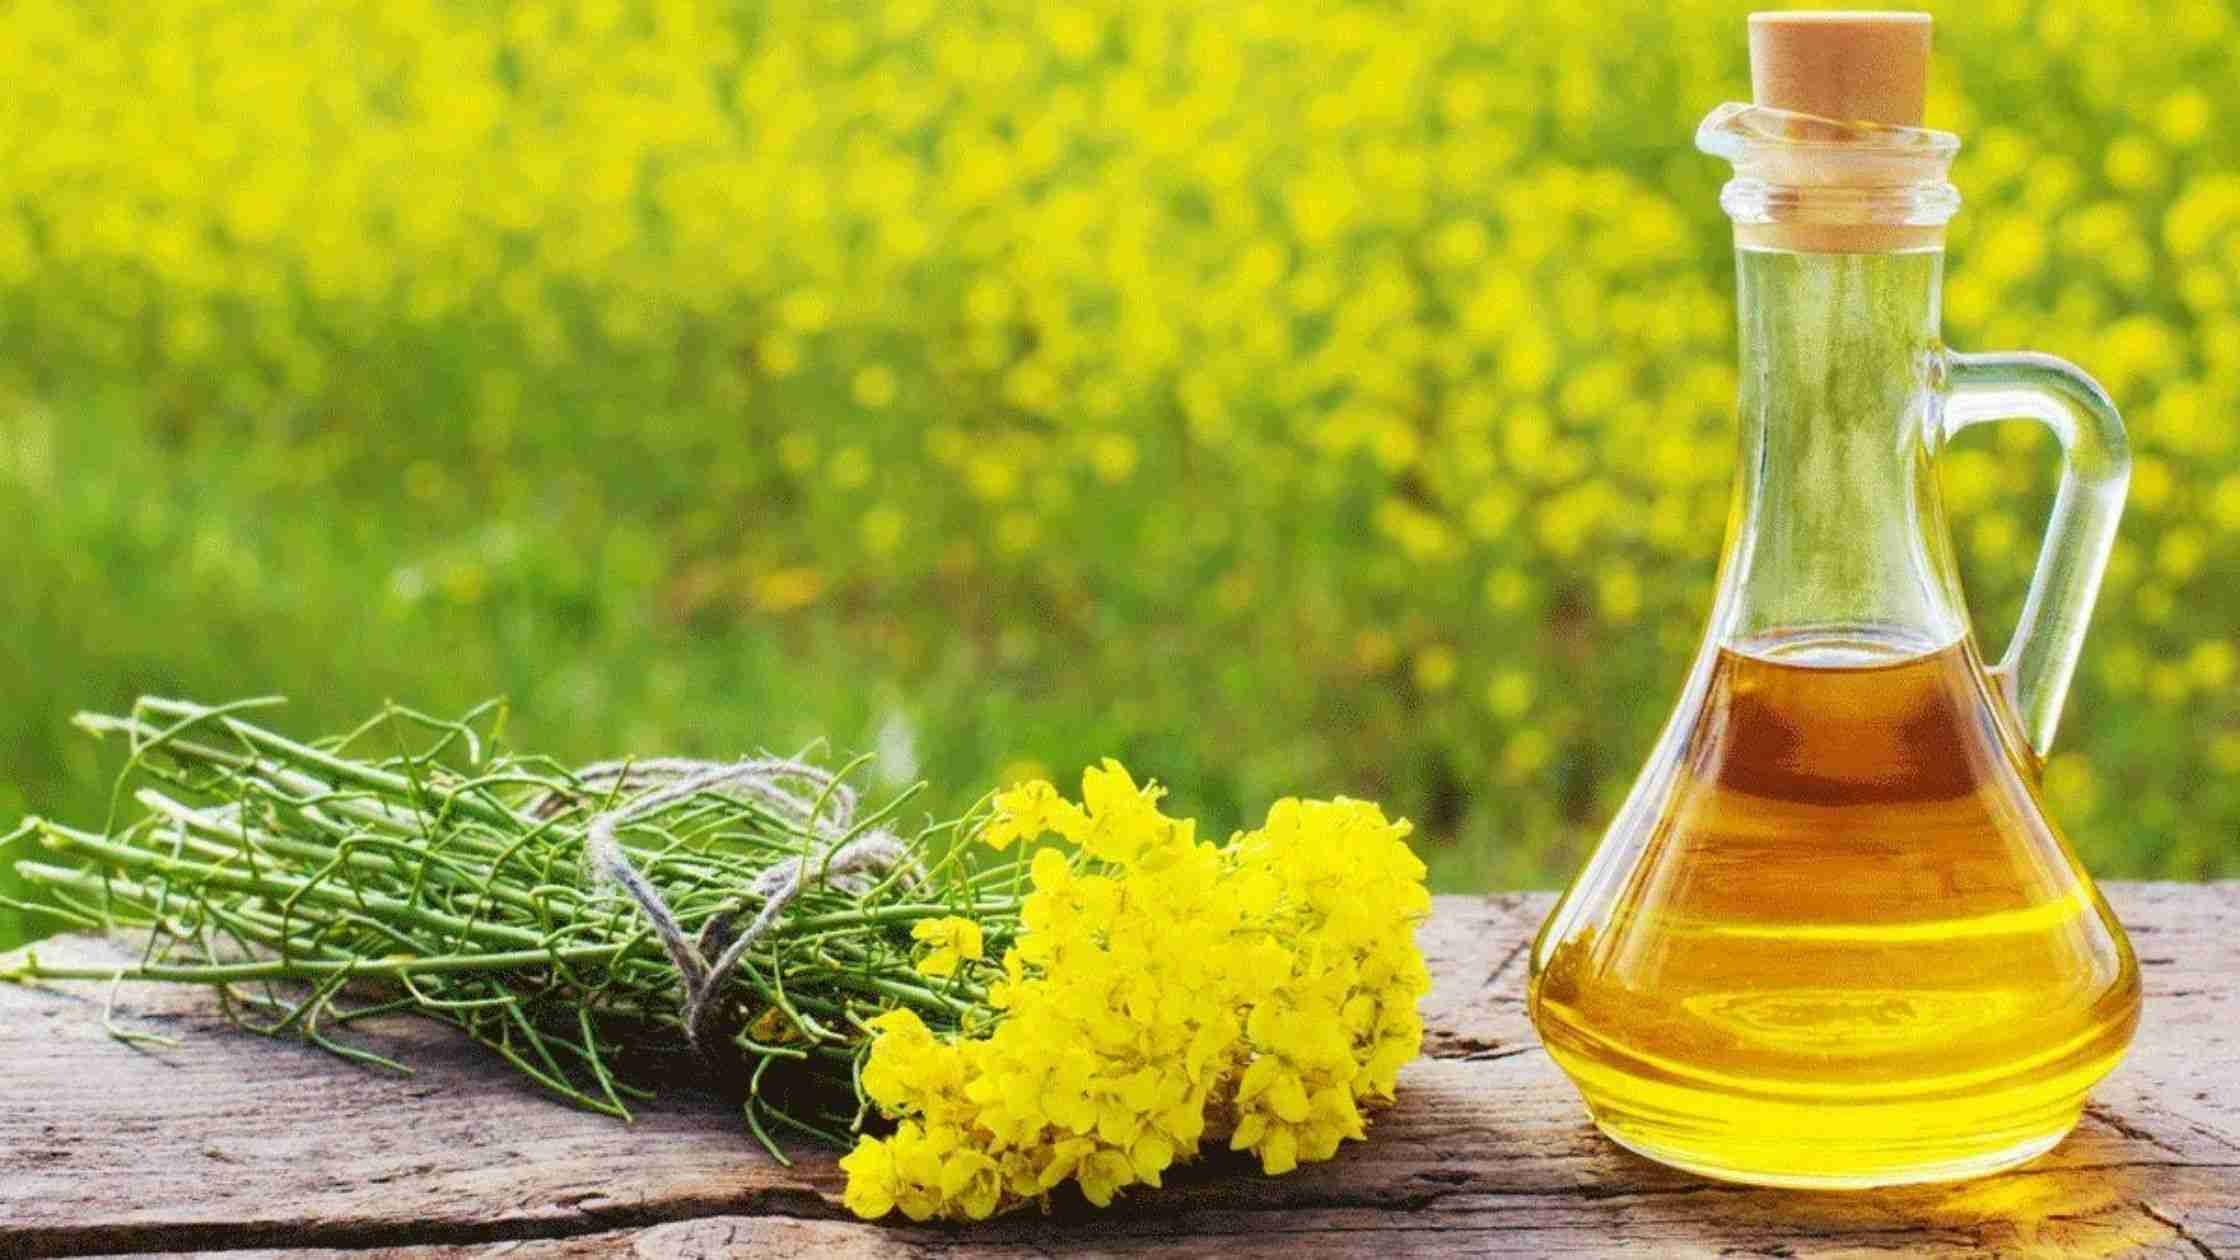 What is the Mustard Oil?